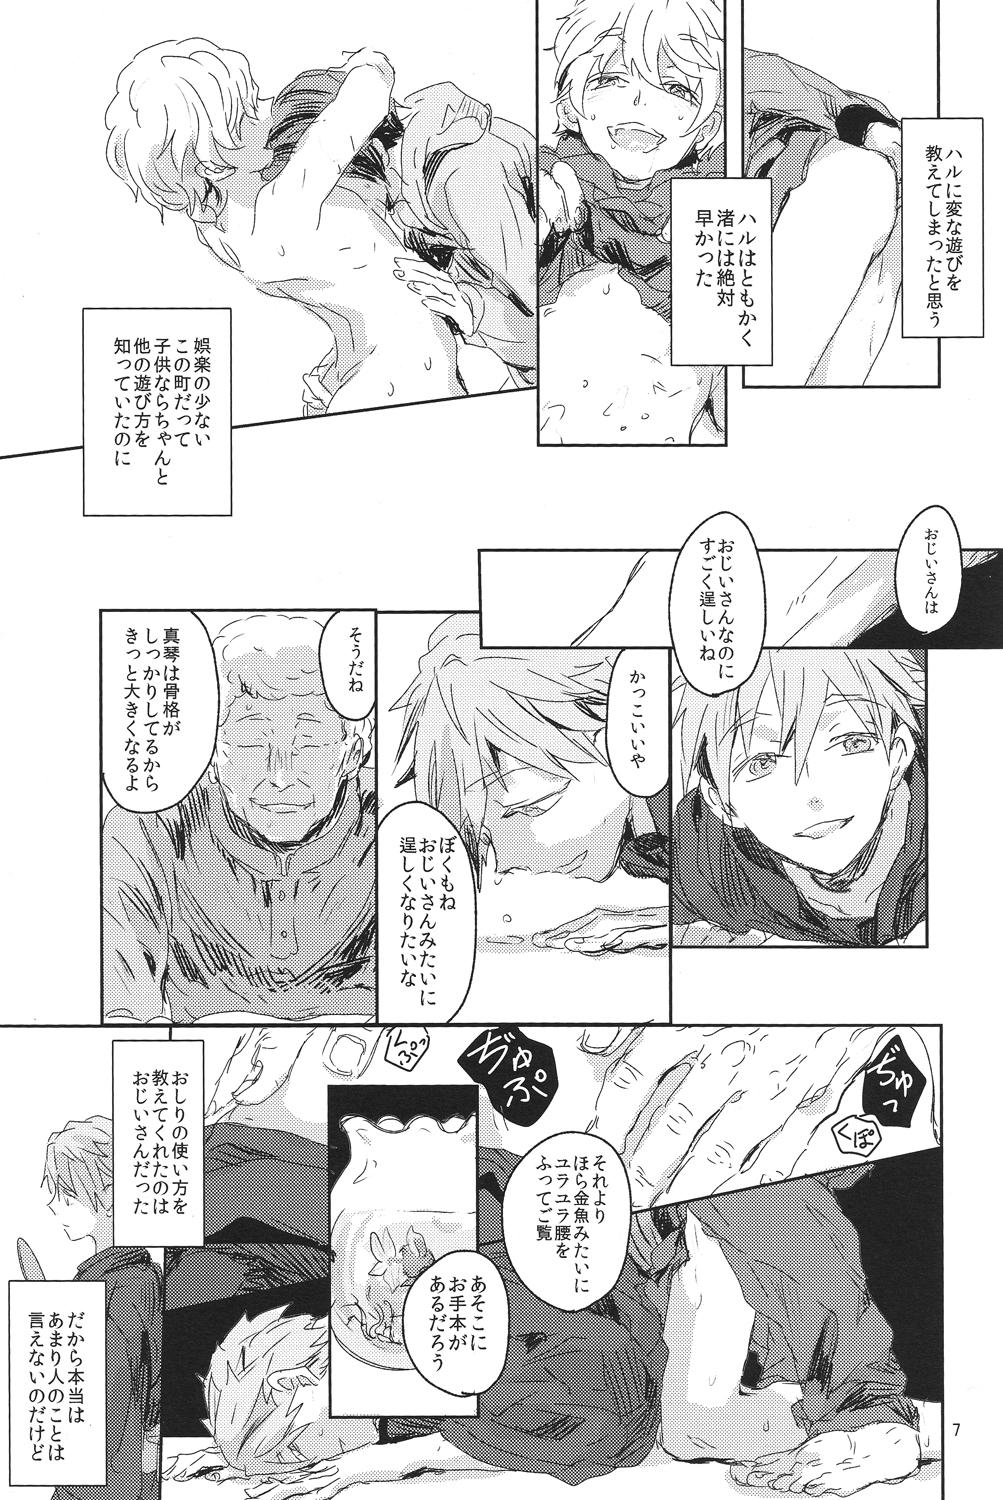 Best Blowjob Oyoganai - Free Gay Orgy - Page 6